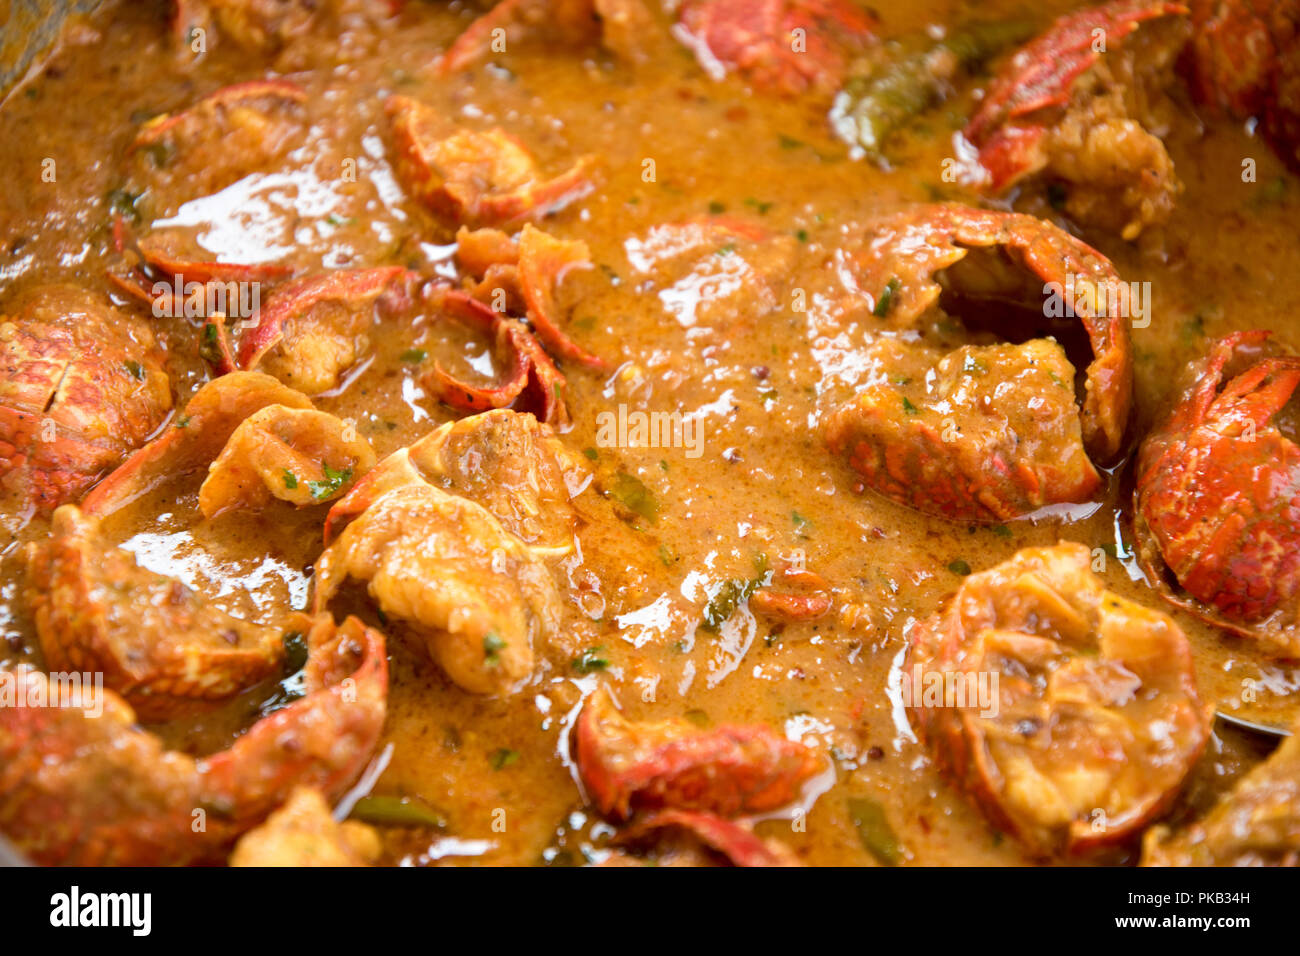 A close up of a spicy seafood or crayfish curry to be served with authentic Indian rice, The crayfish boiled, de-veined and prepared as curry gravy Stock Photo